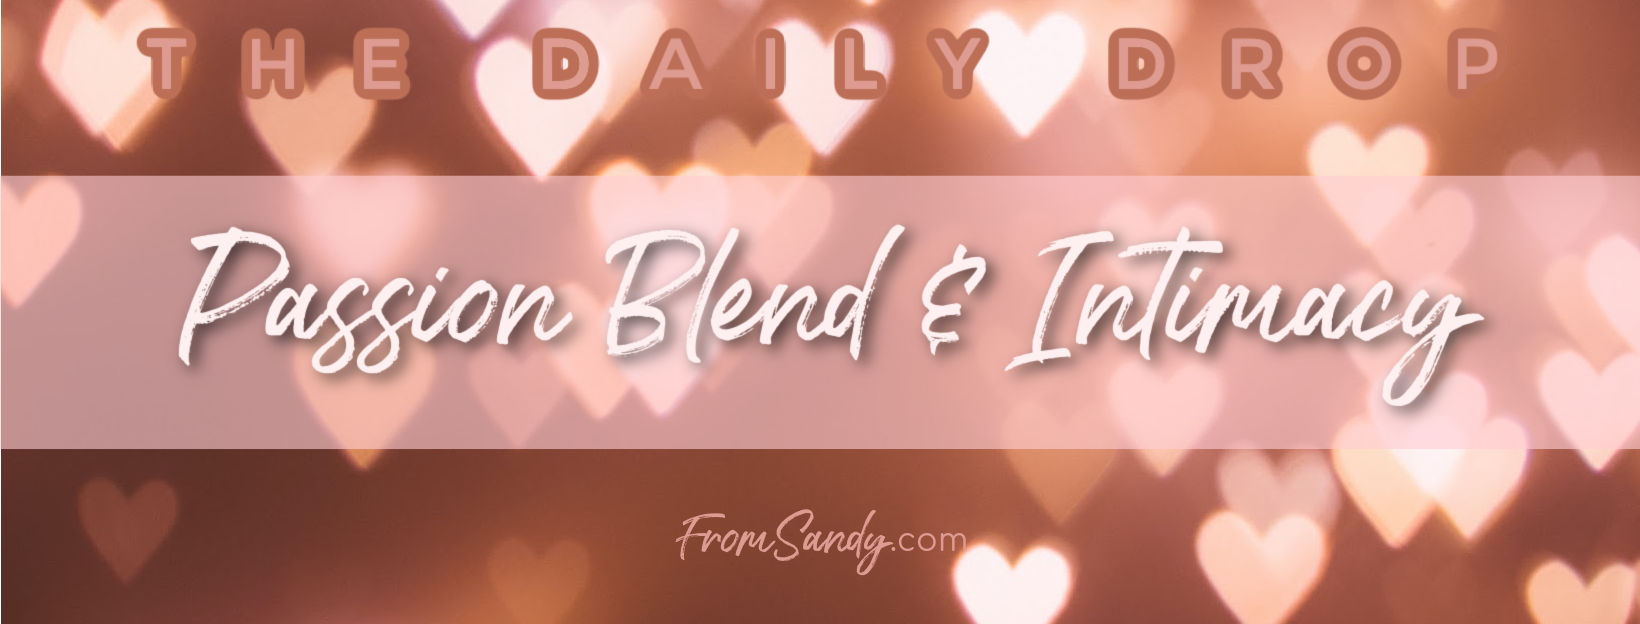 Passion Blend & Intimacy, From Sandy